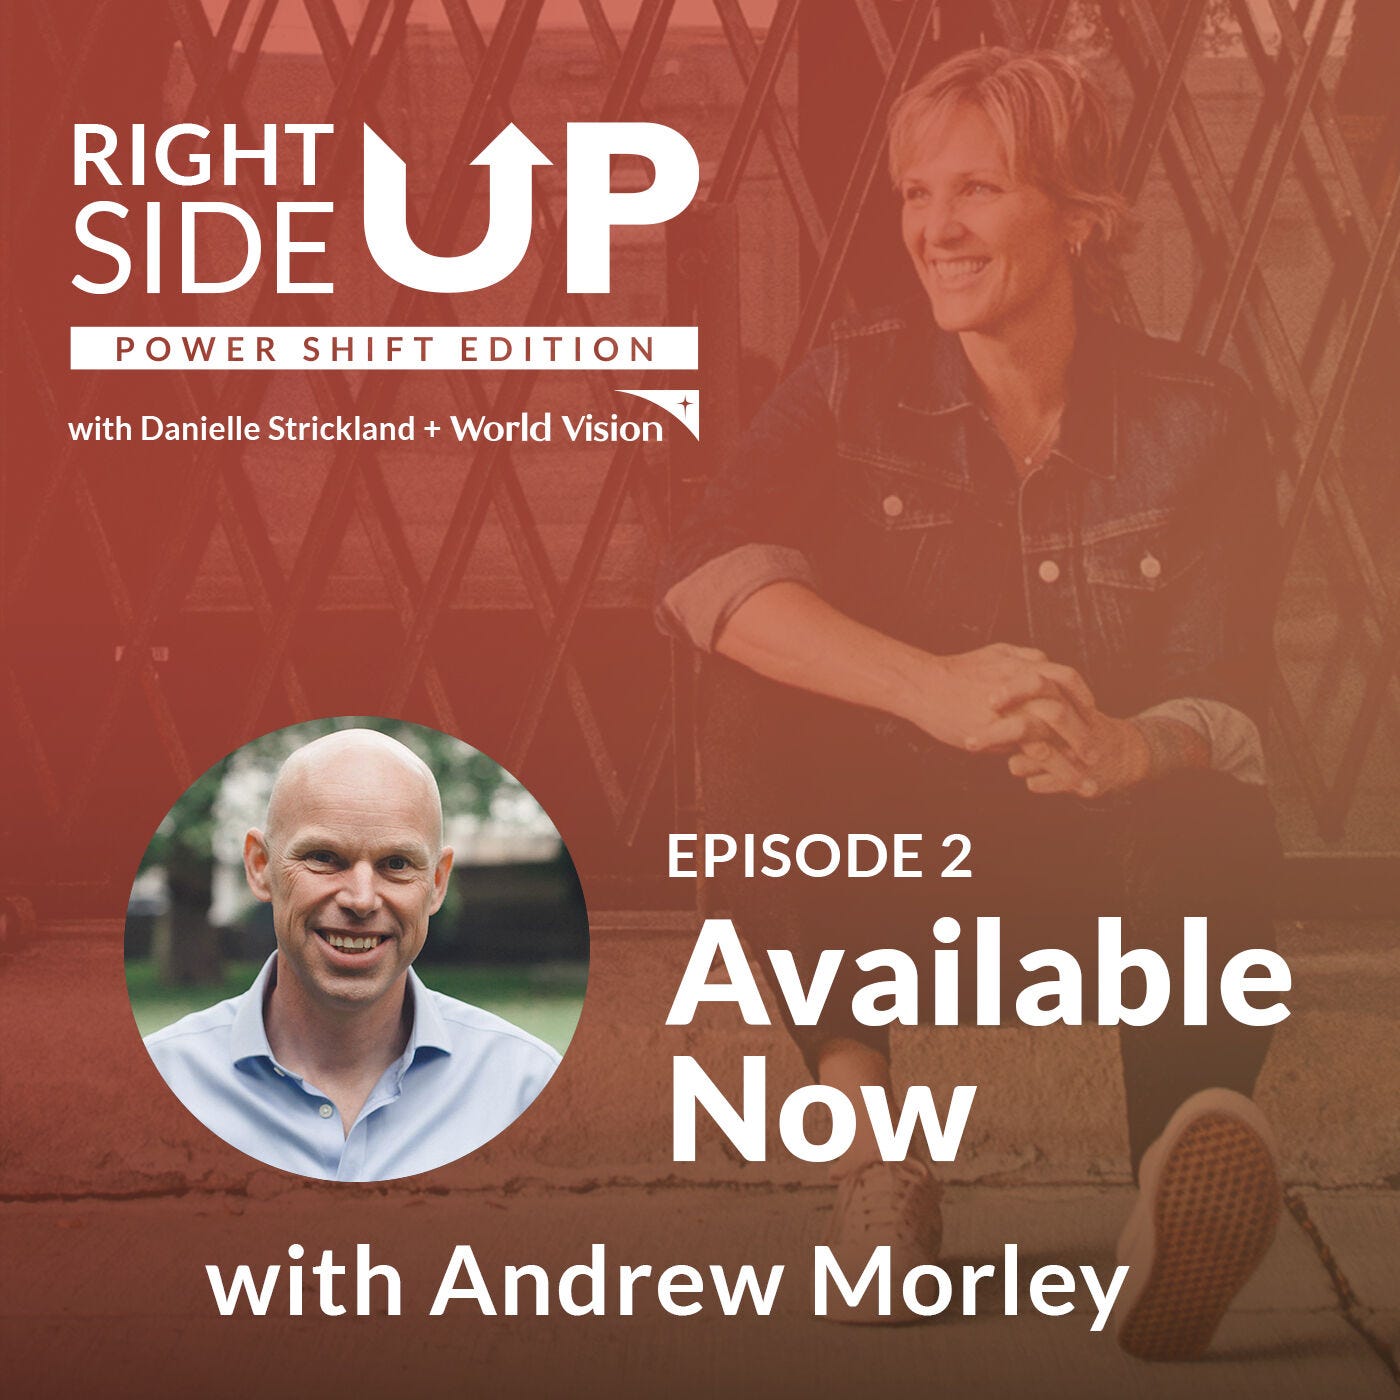 Power Shift Edition: Interview with Andrew Morley